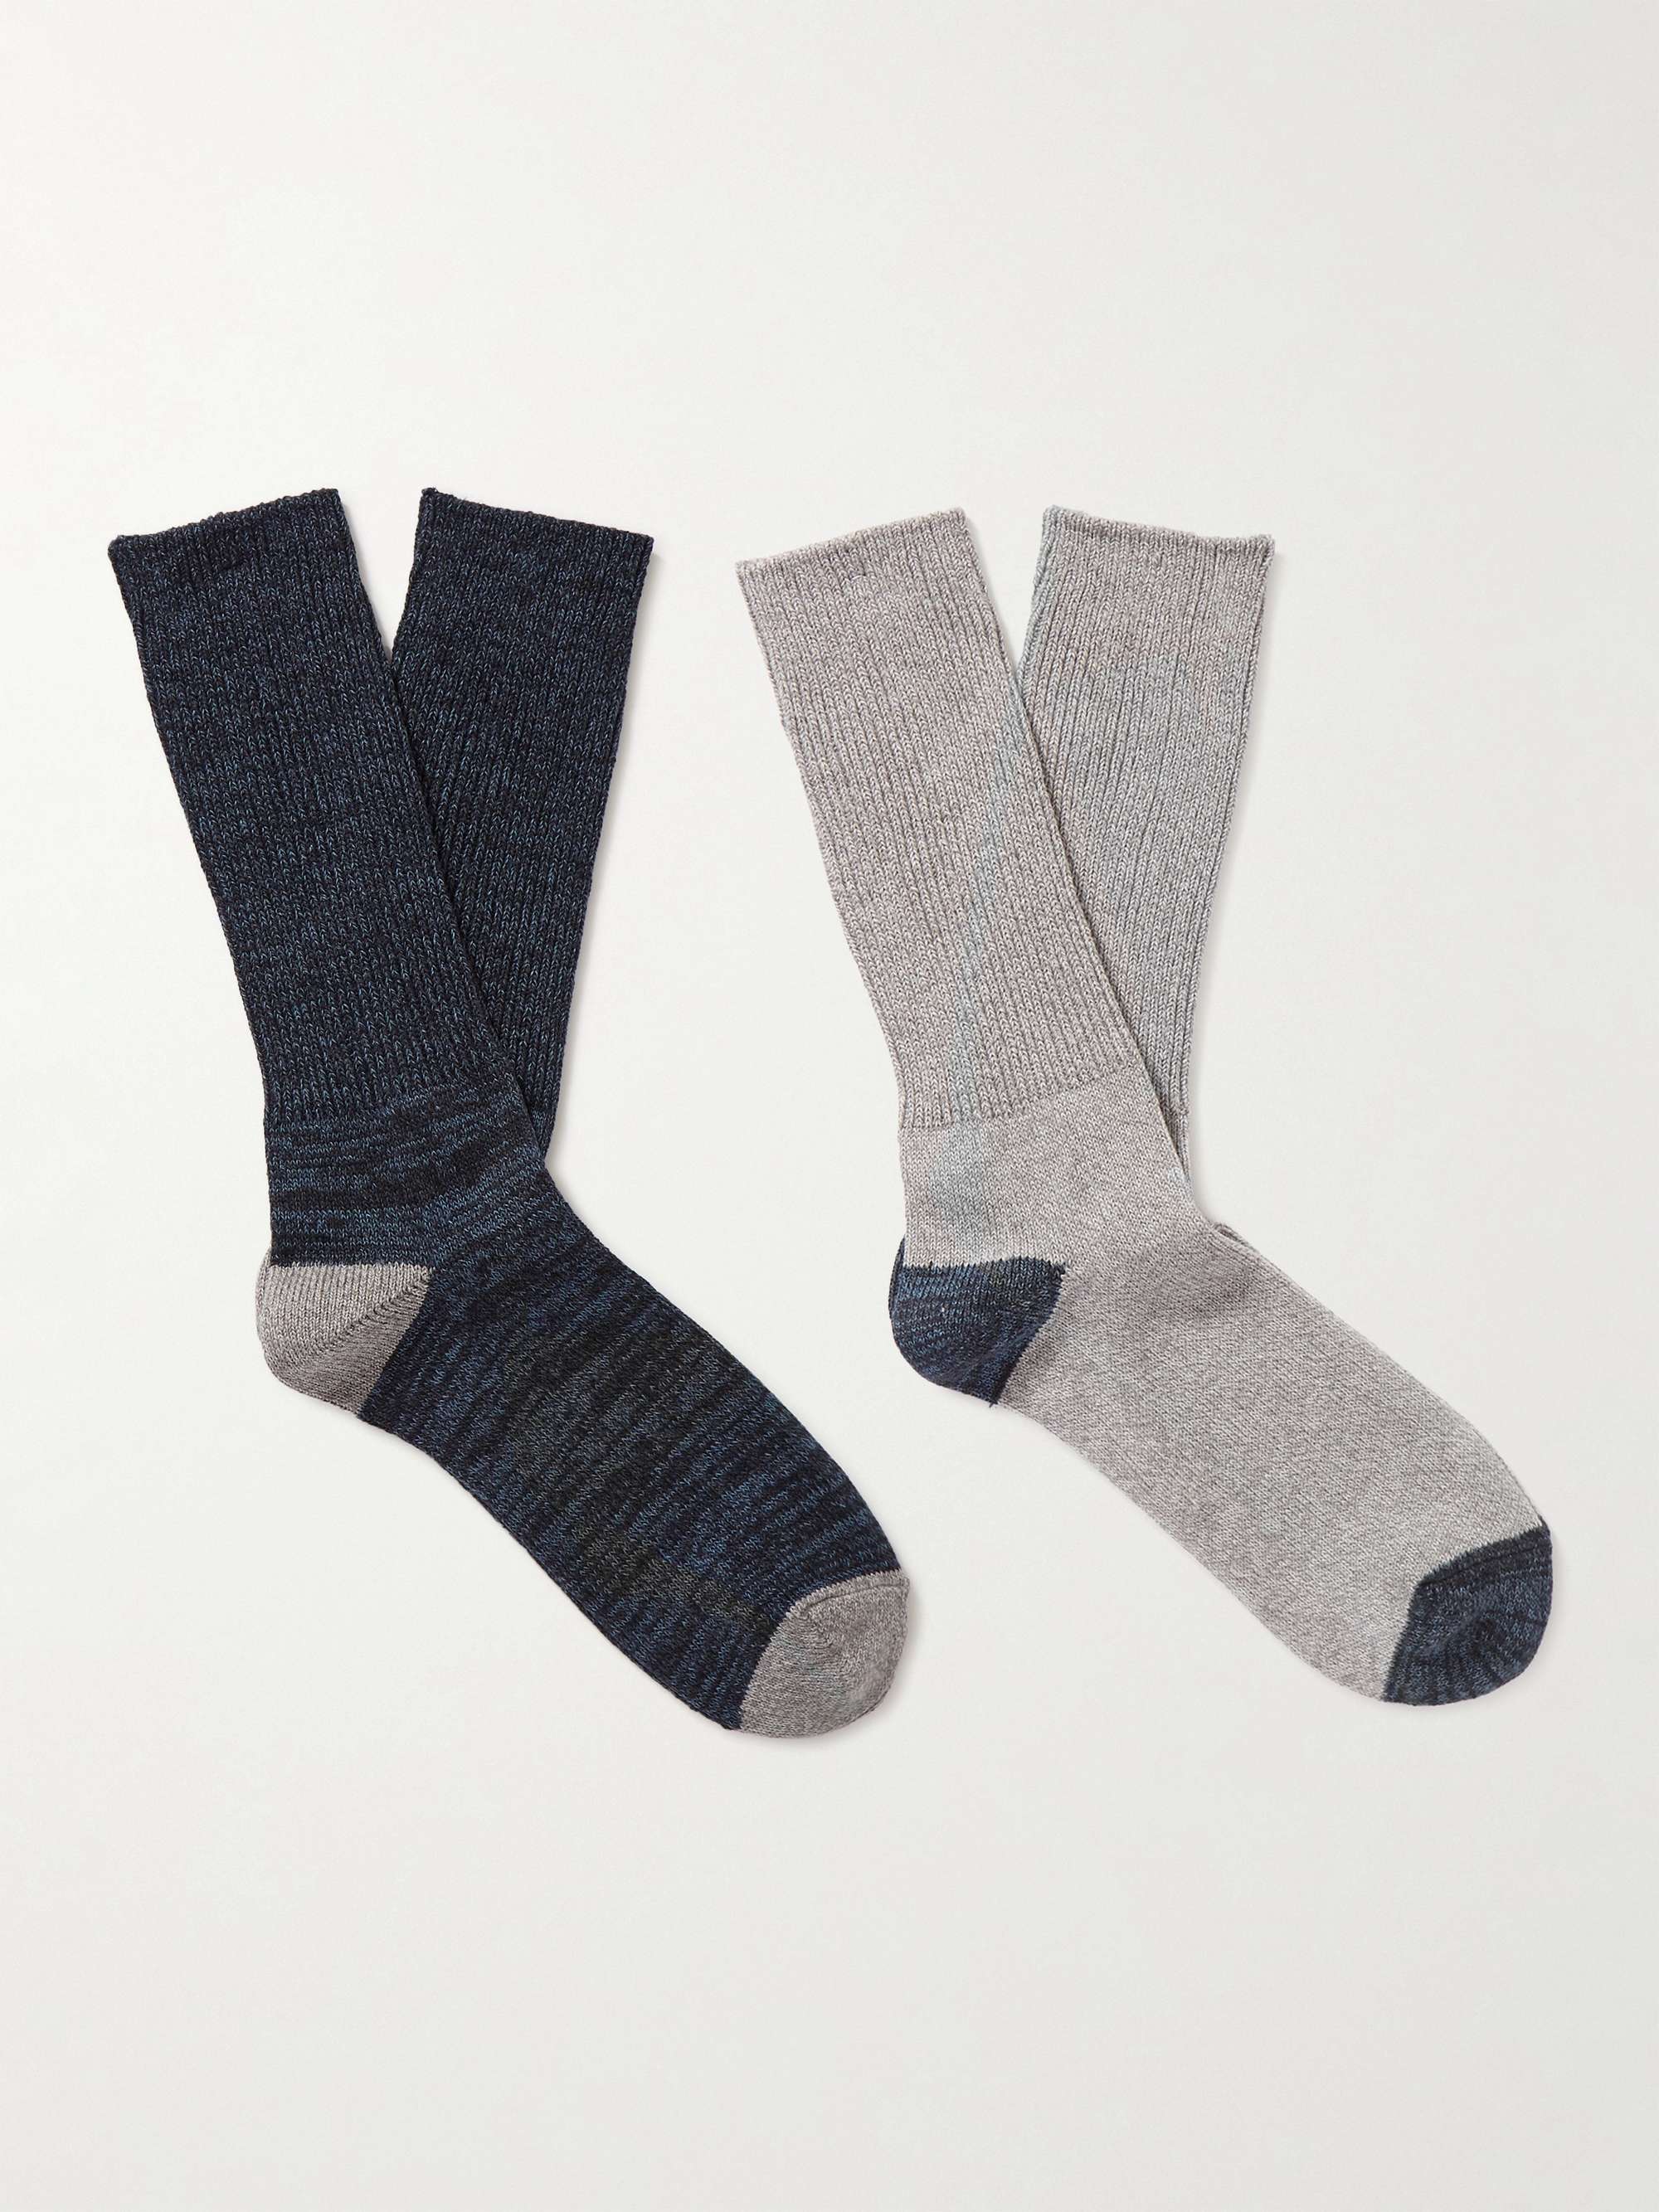 MR P. Two-Pack Knitted Socks